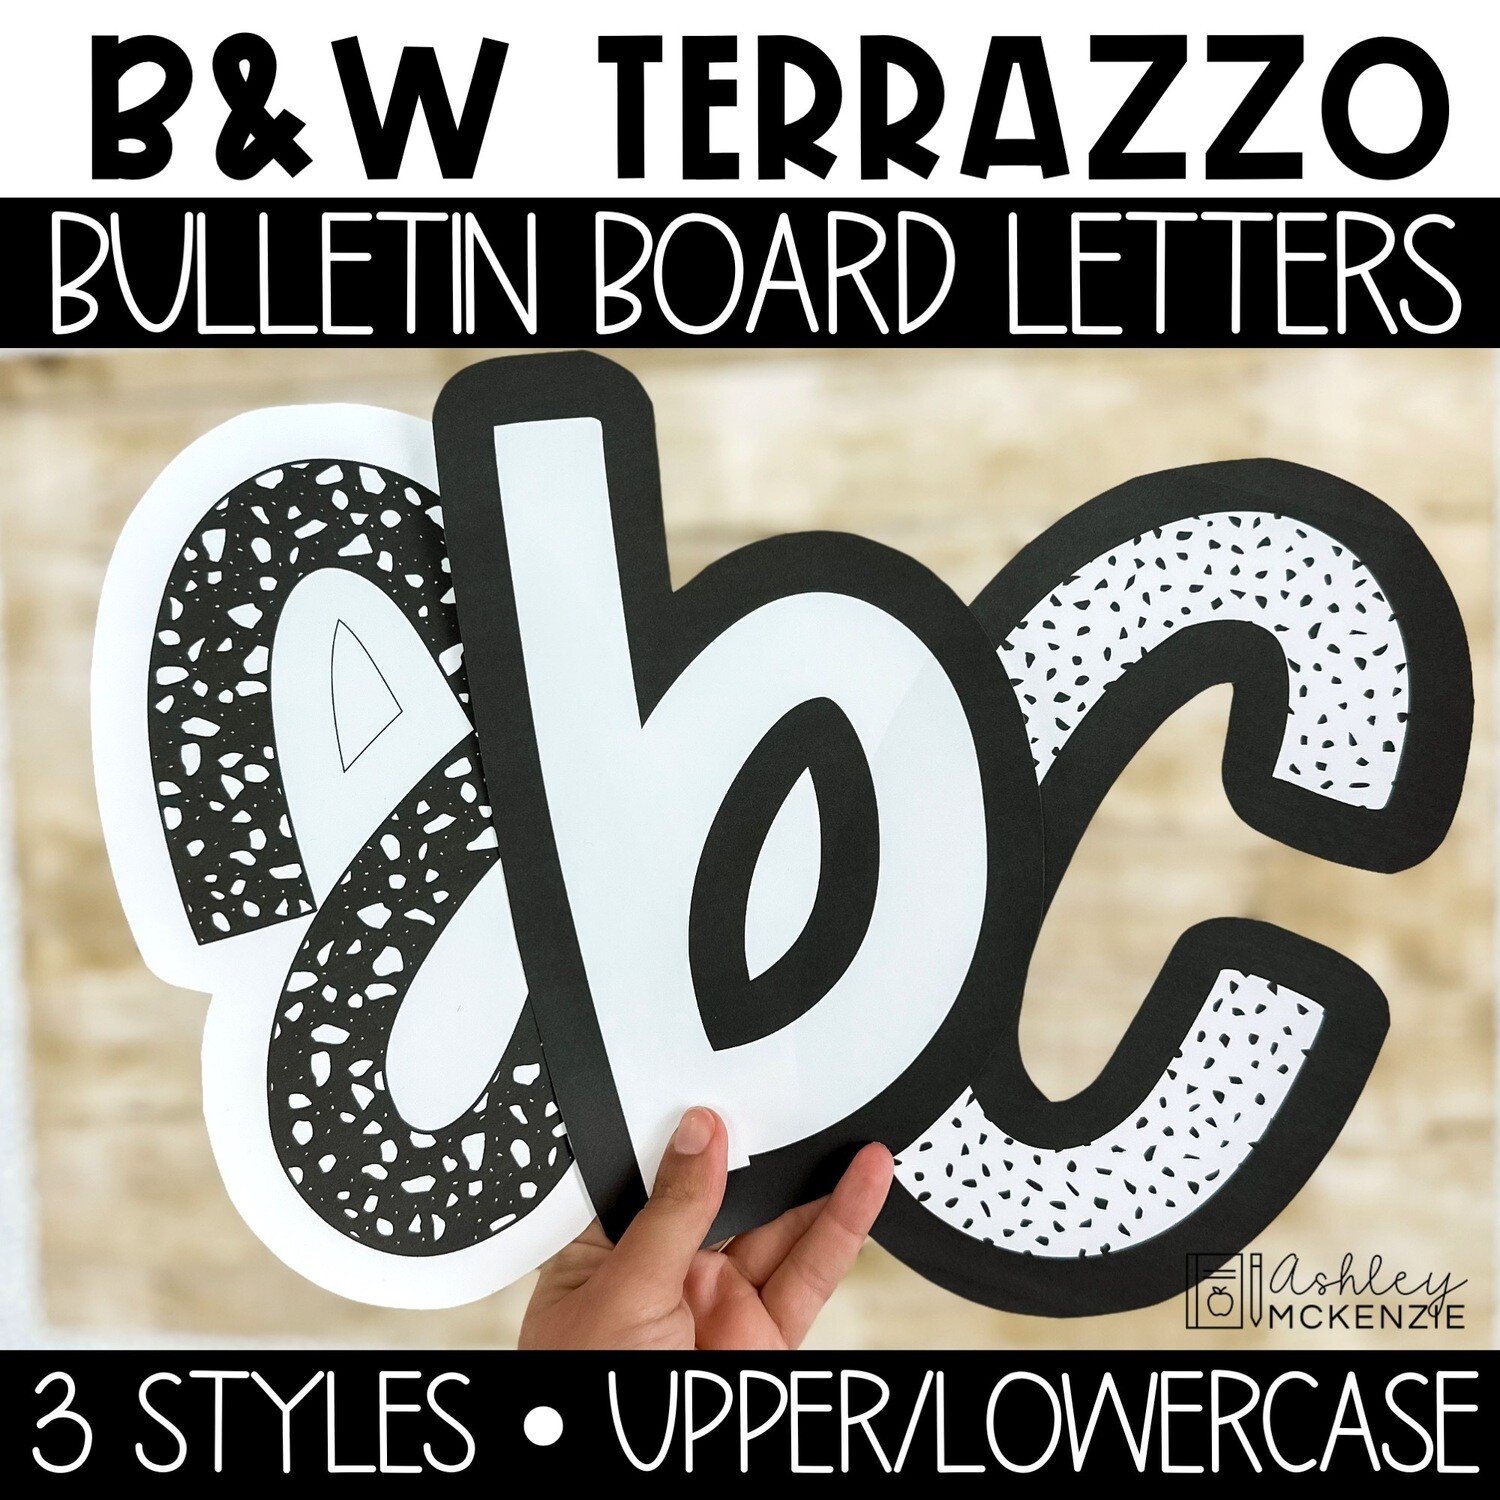 Bulletin Board Letters Made Easy (SIMPLE Steps)